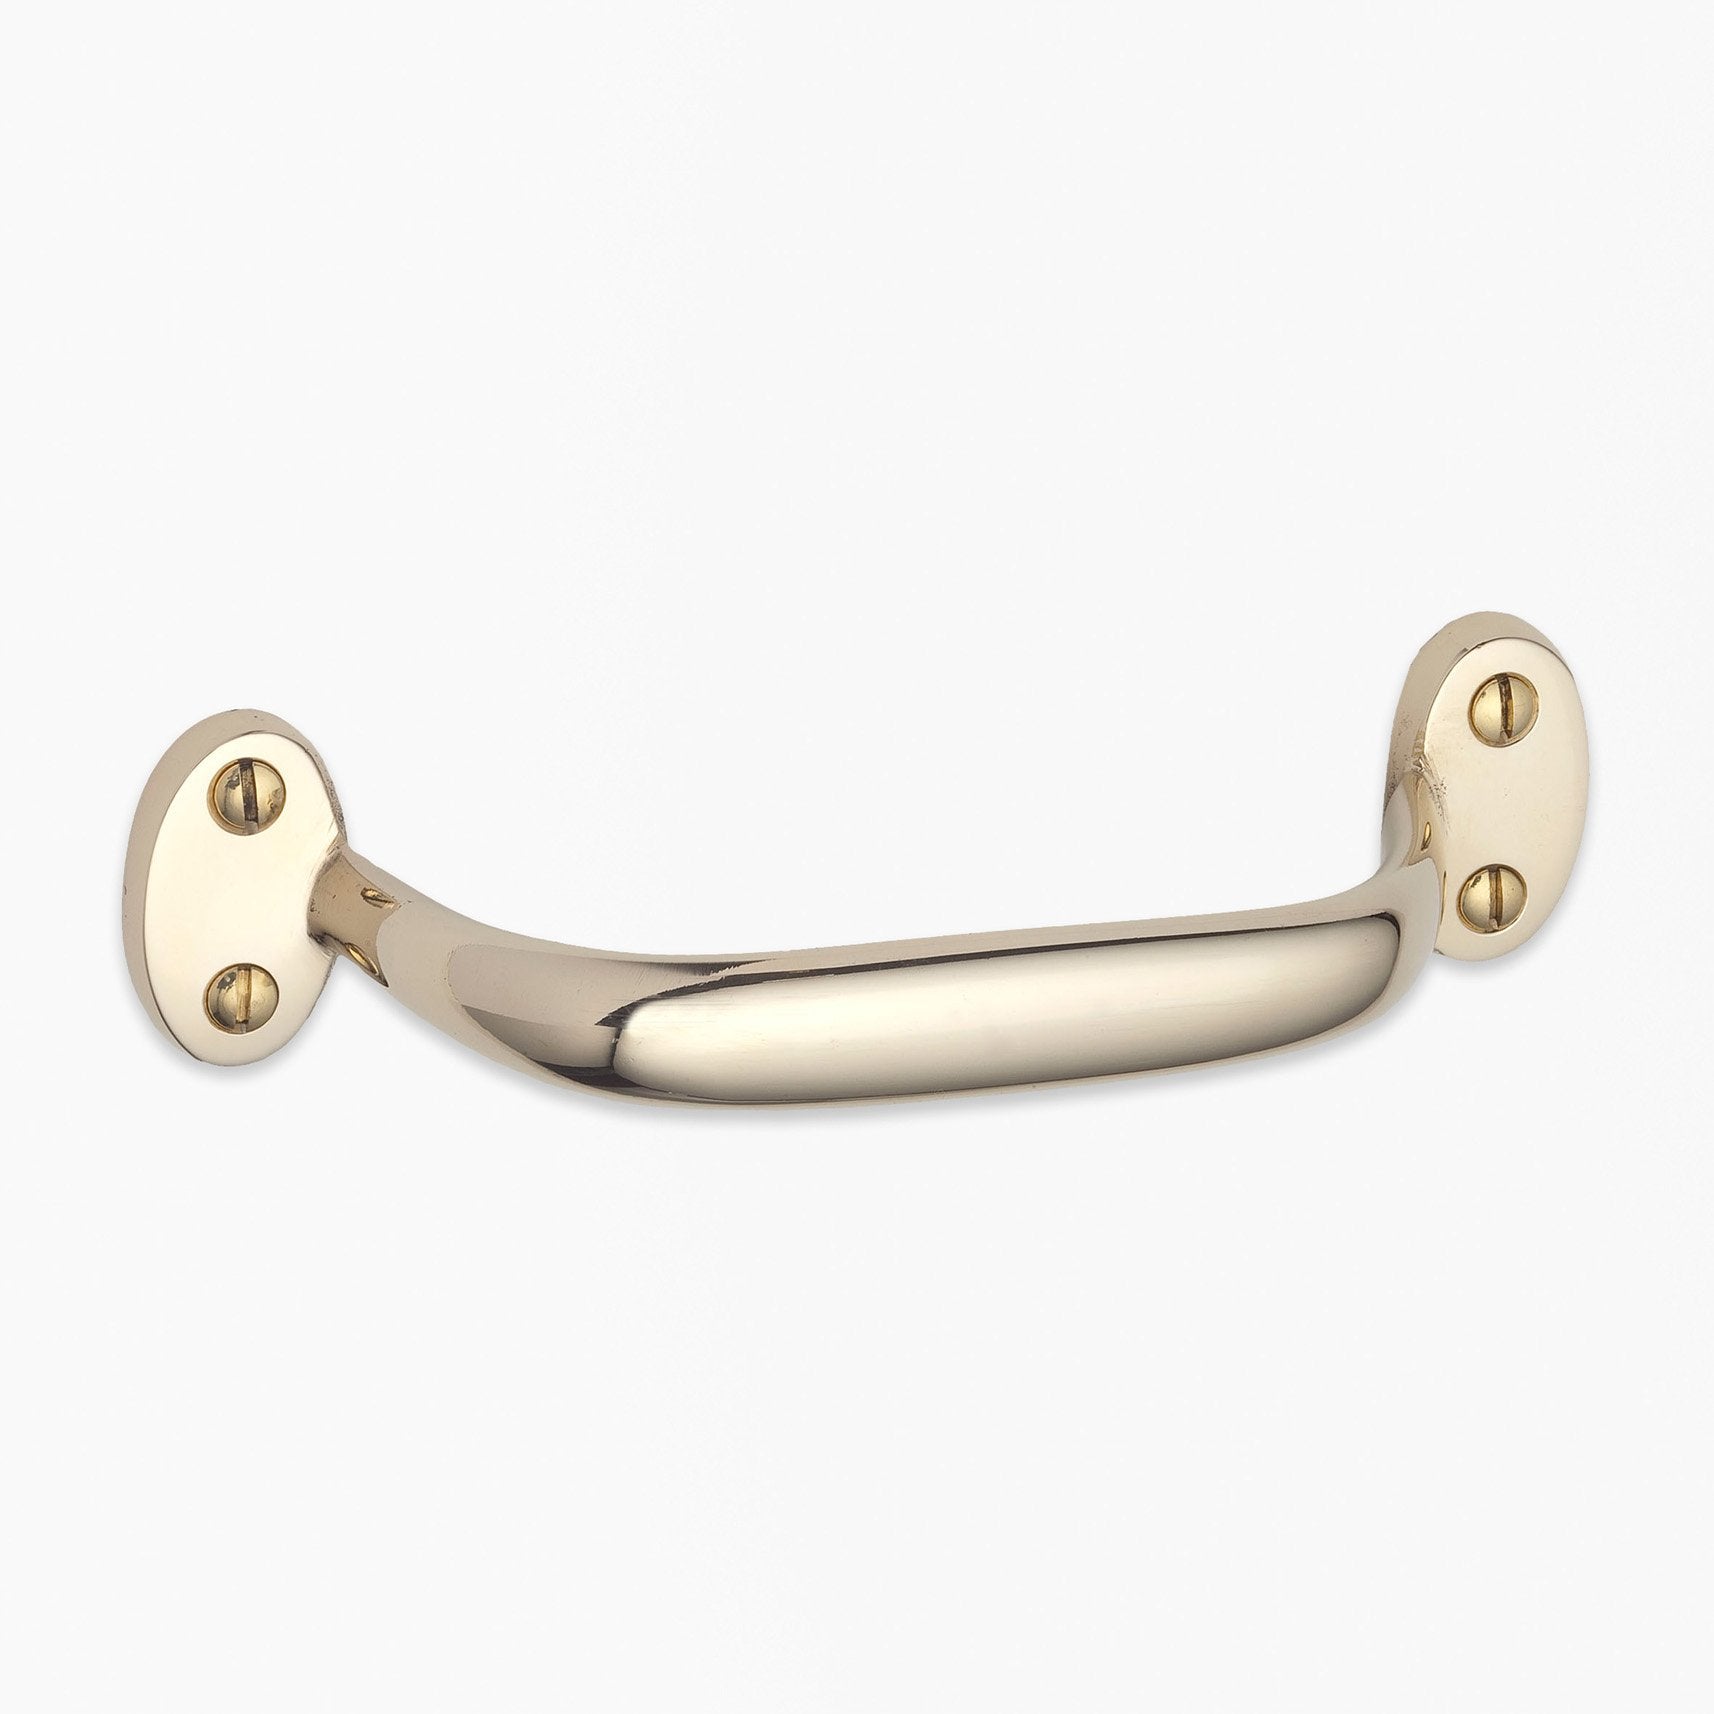 Drawer Pull 084 Product Image 1